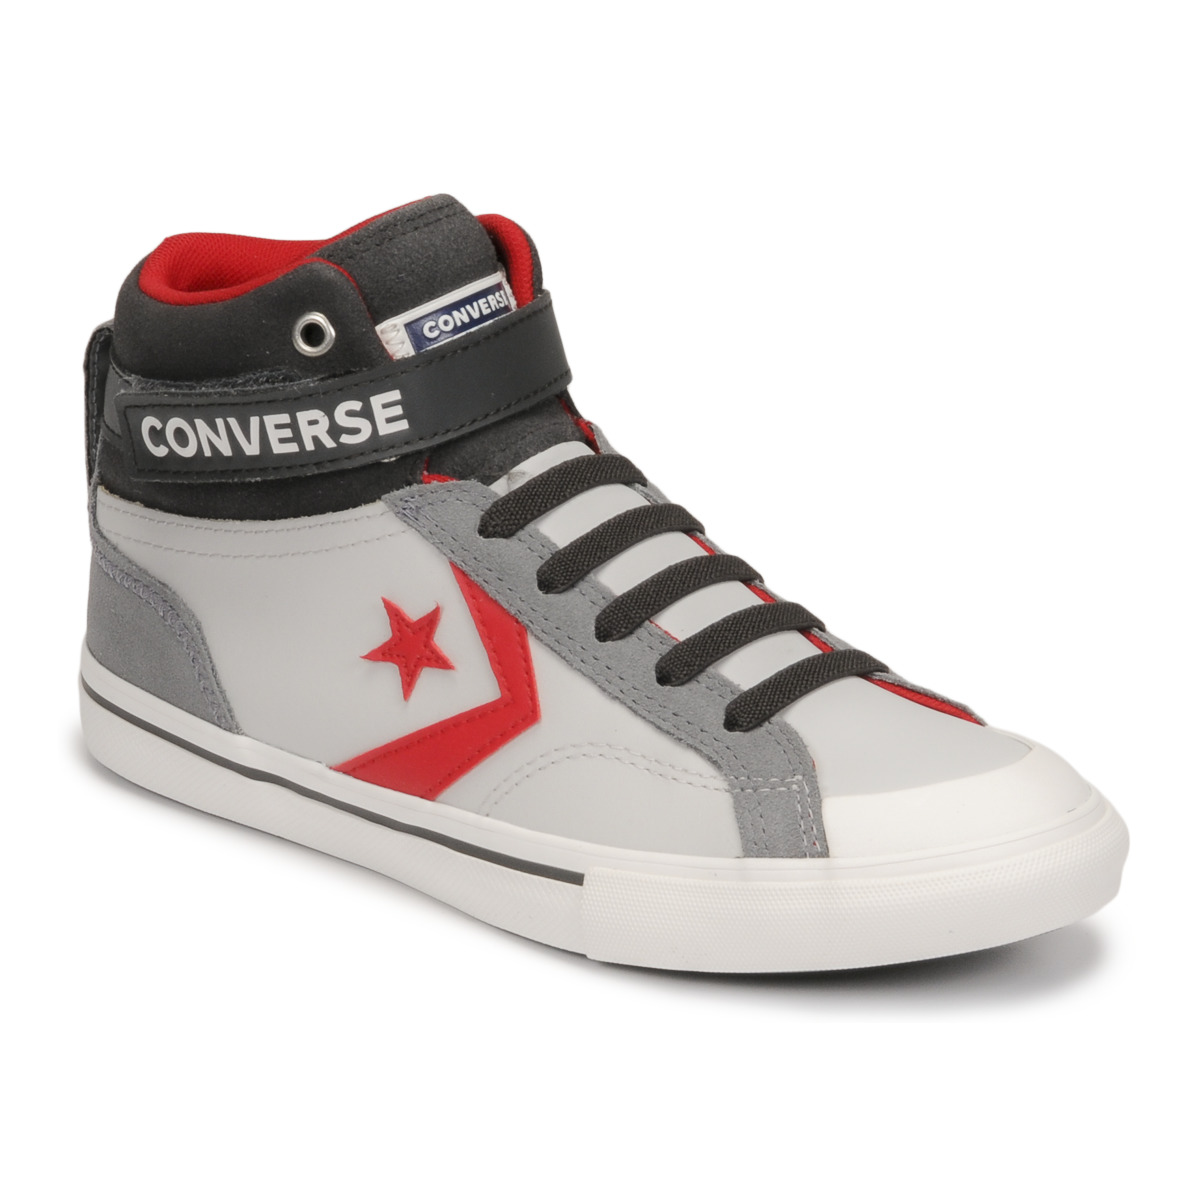 Converse PRO Free HI STRAP LEATHER Delivery - BLAZE Child top ! £ TWIST Grey Hi Rubbersole.co.uk Shoes trainers with 